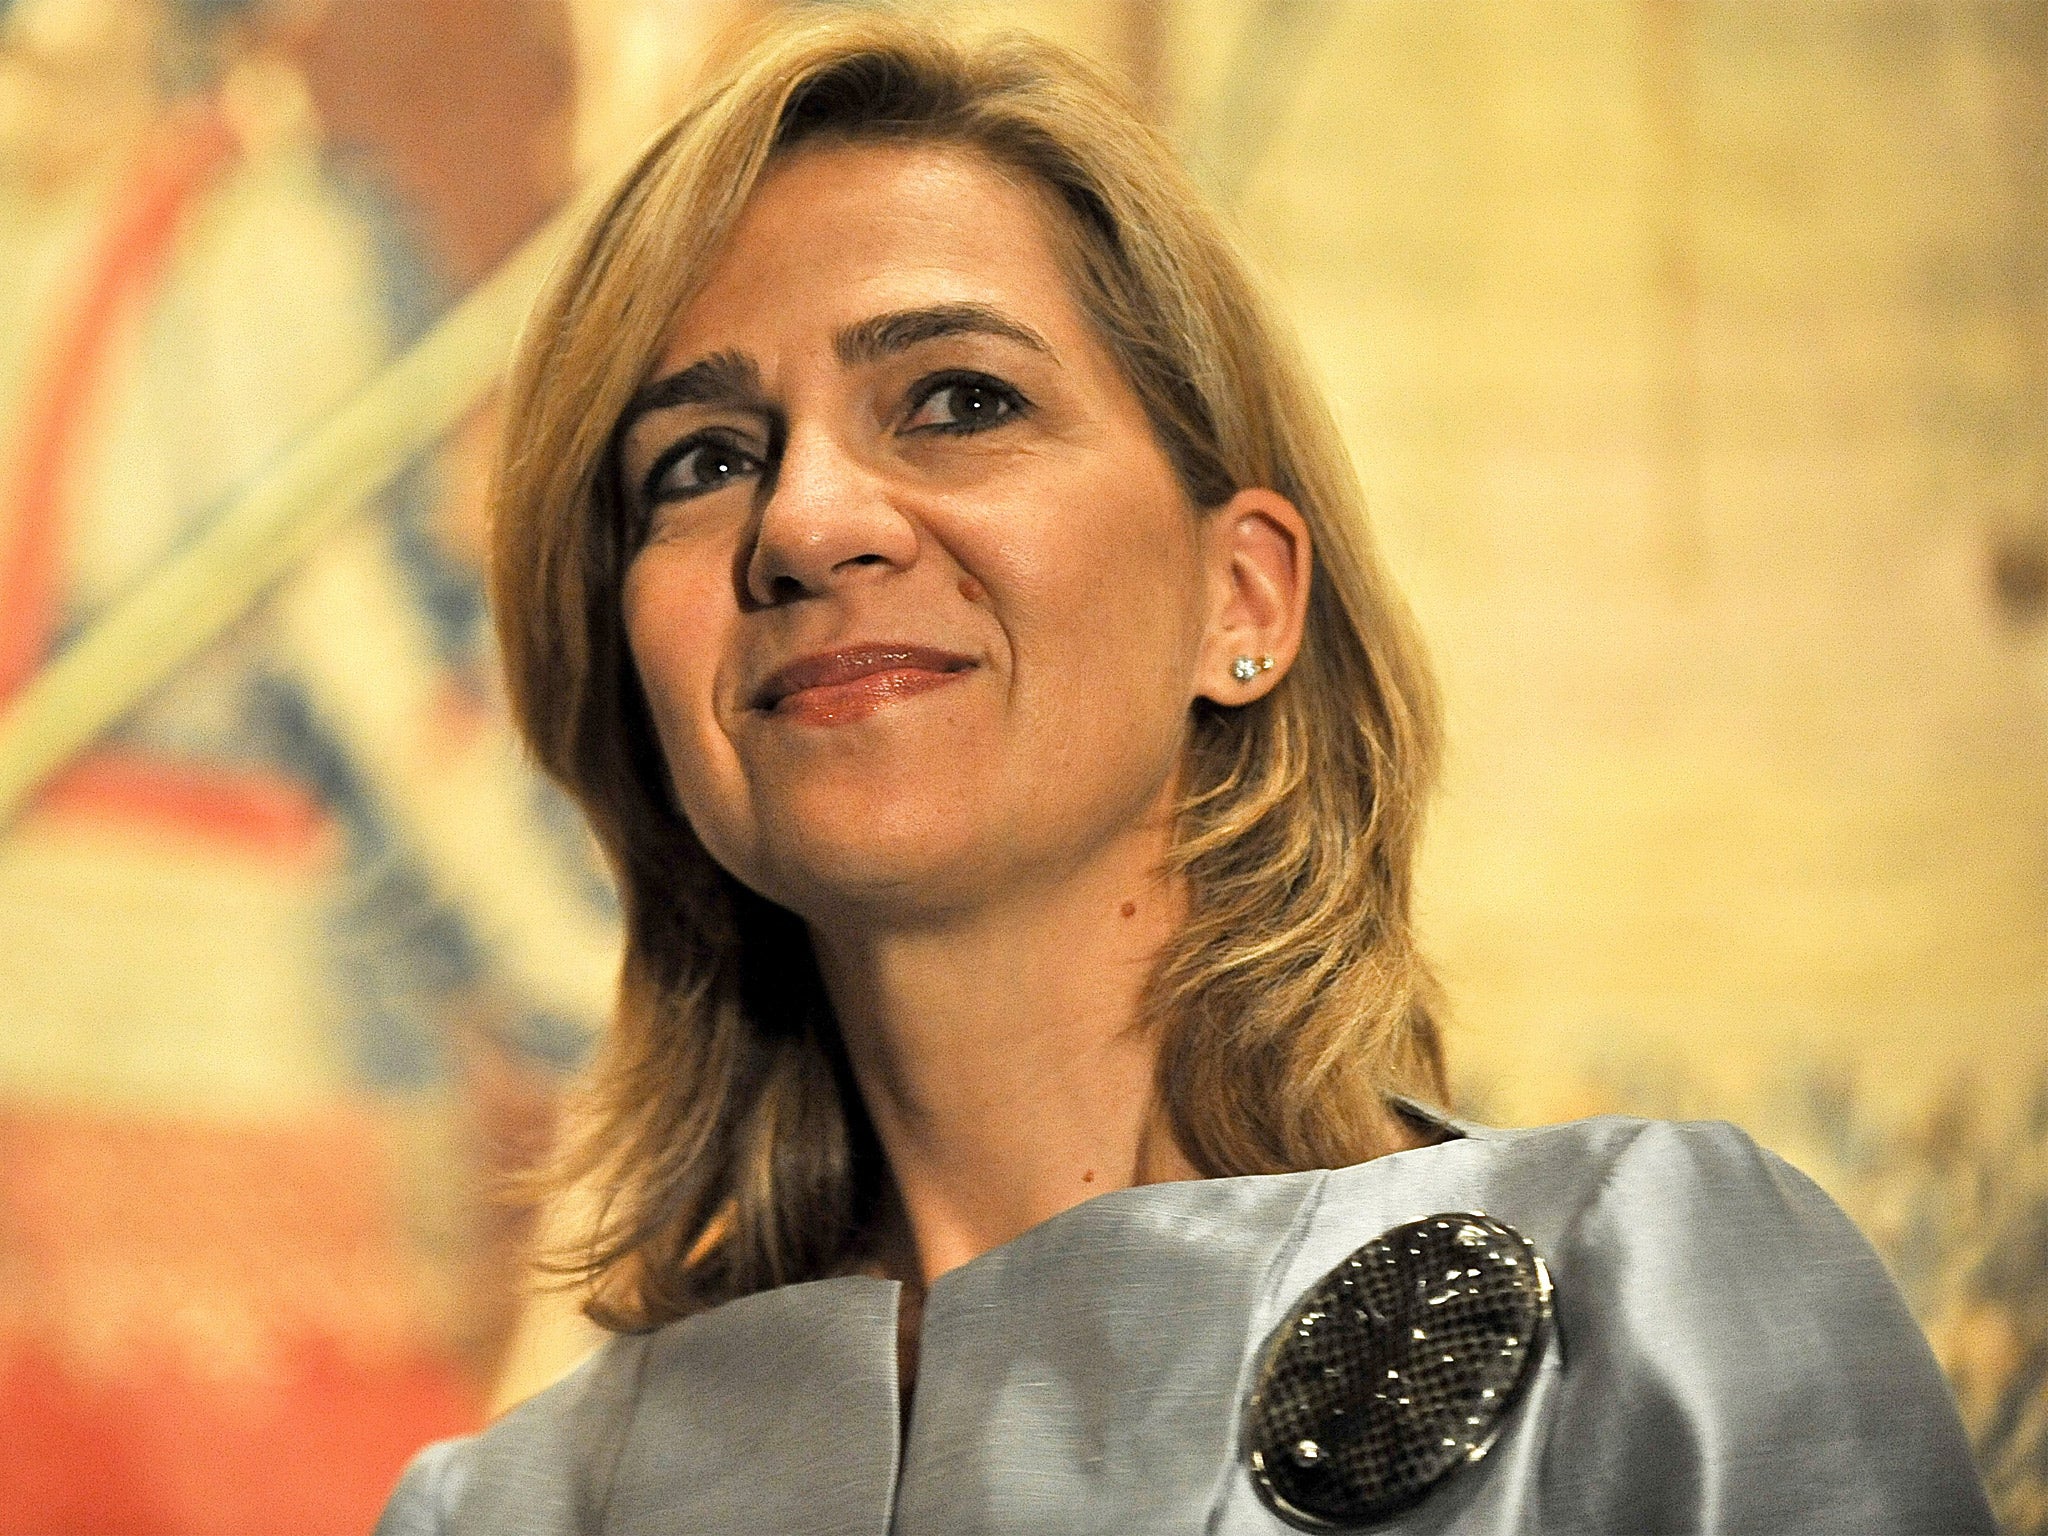 Princess Cristina will appear in court on 8 March